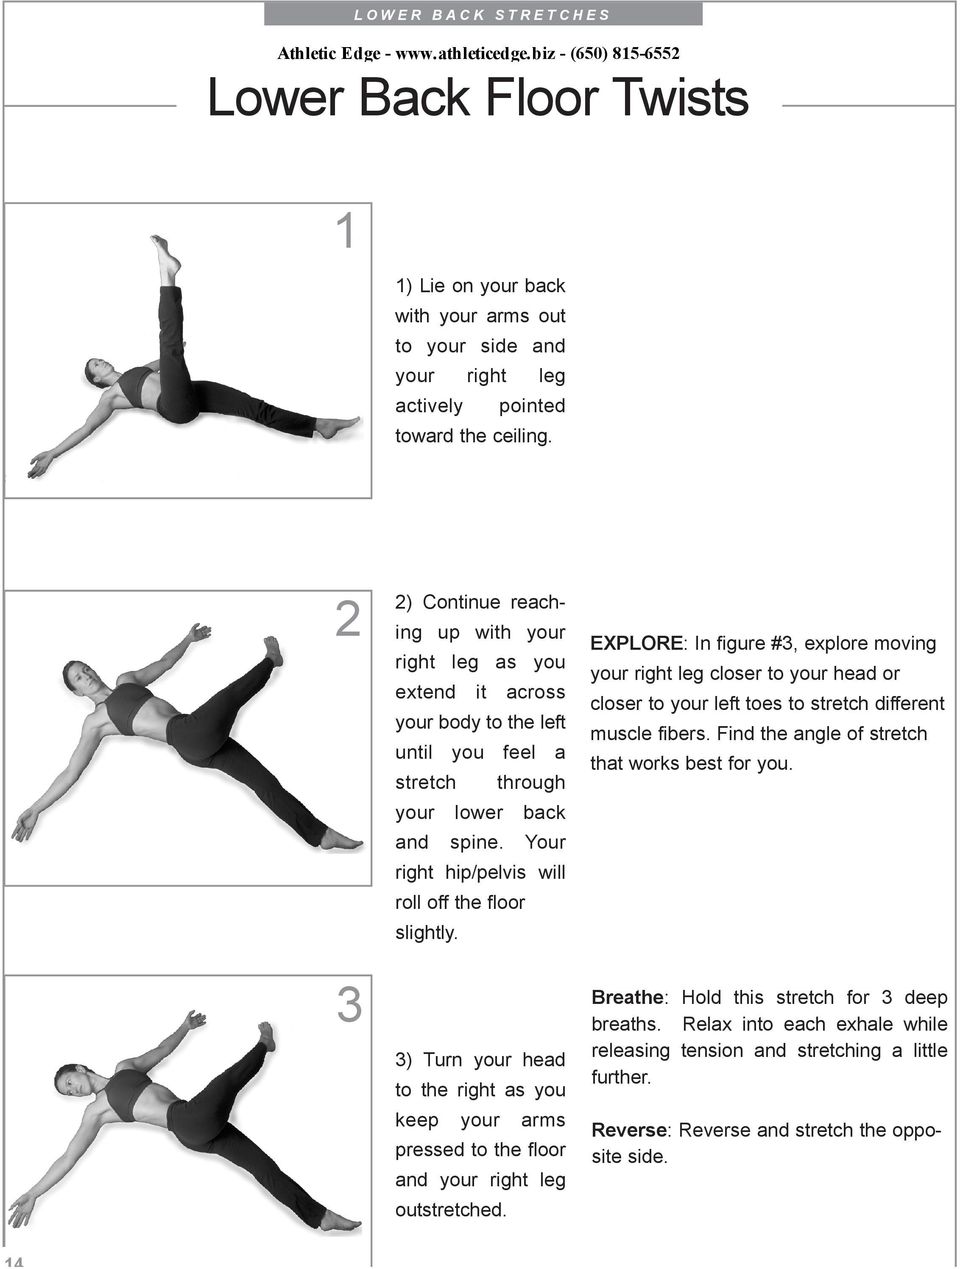 Your right hip/pelvis will roll off the floor slightly. ) Turn your head to the right as you keep your arms pressed to the floor and your right leg outstretched.